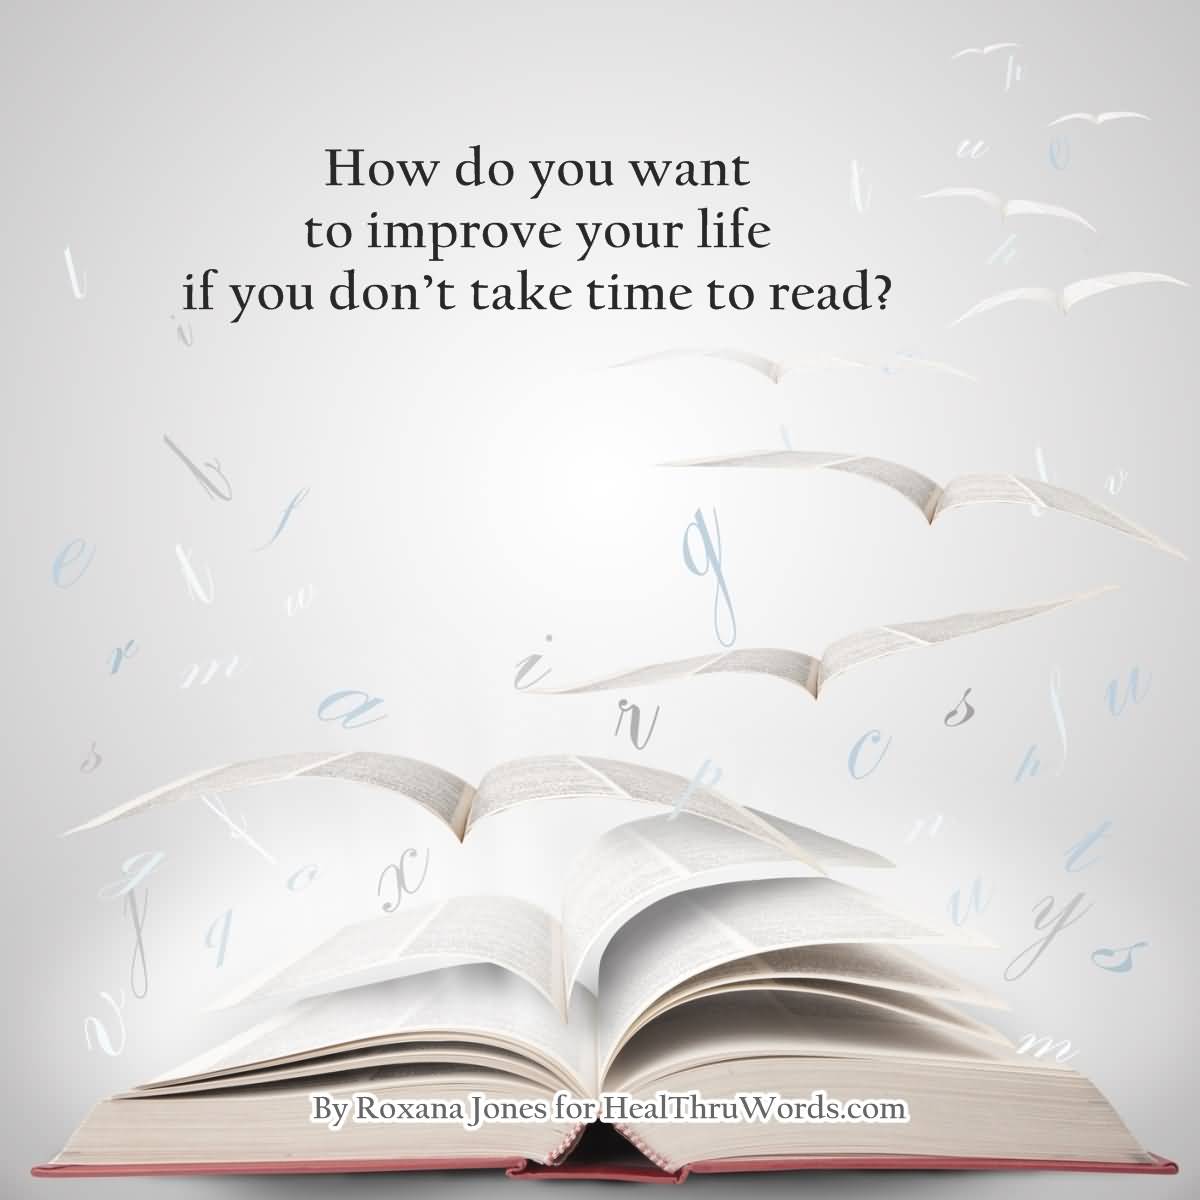 How do you want to improve your life if you don’t take time to read1